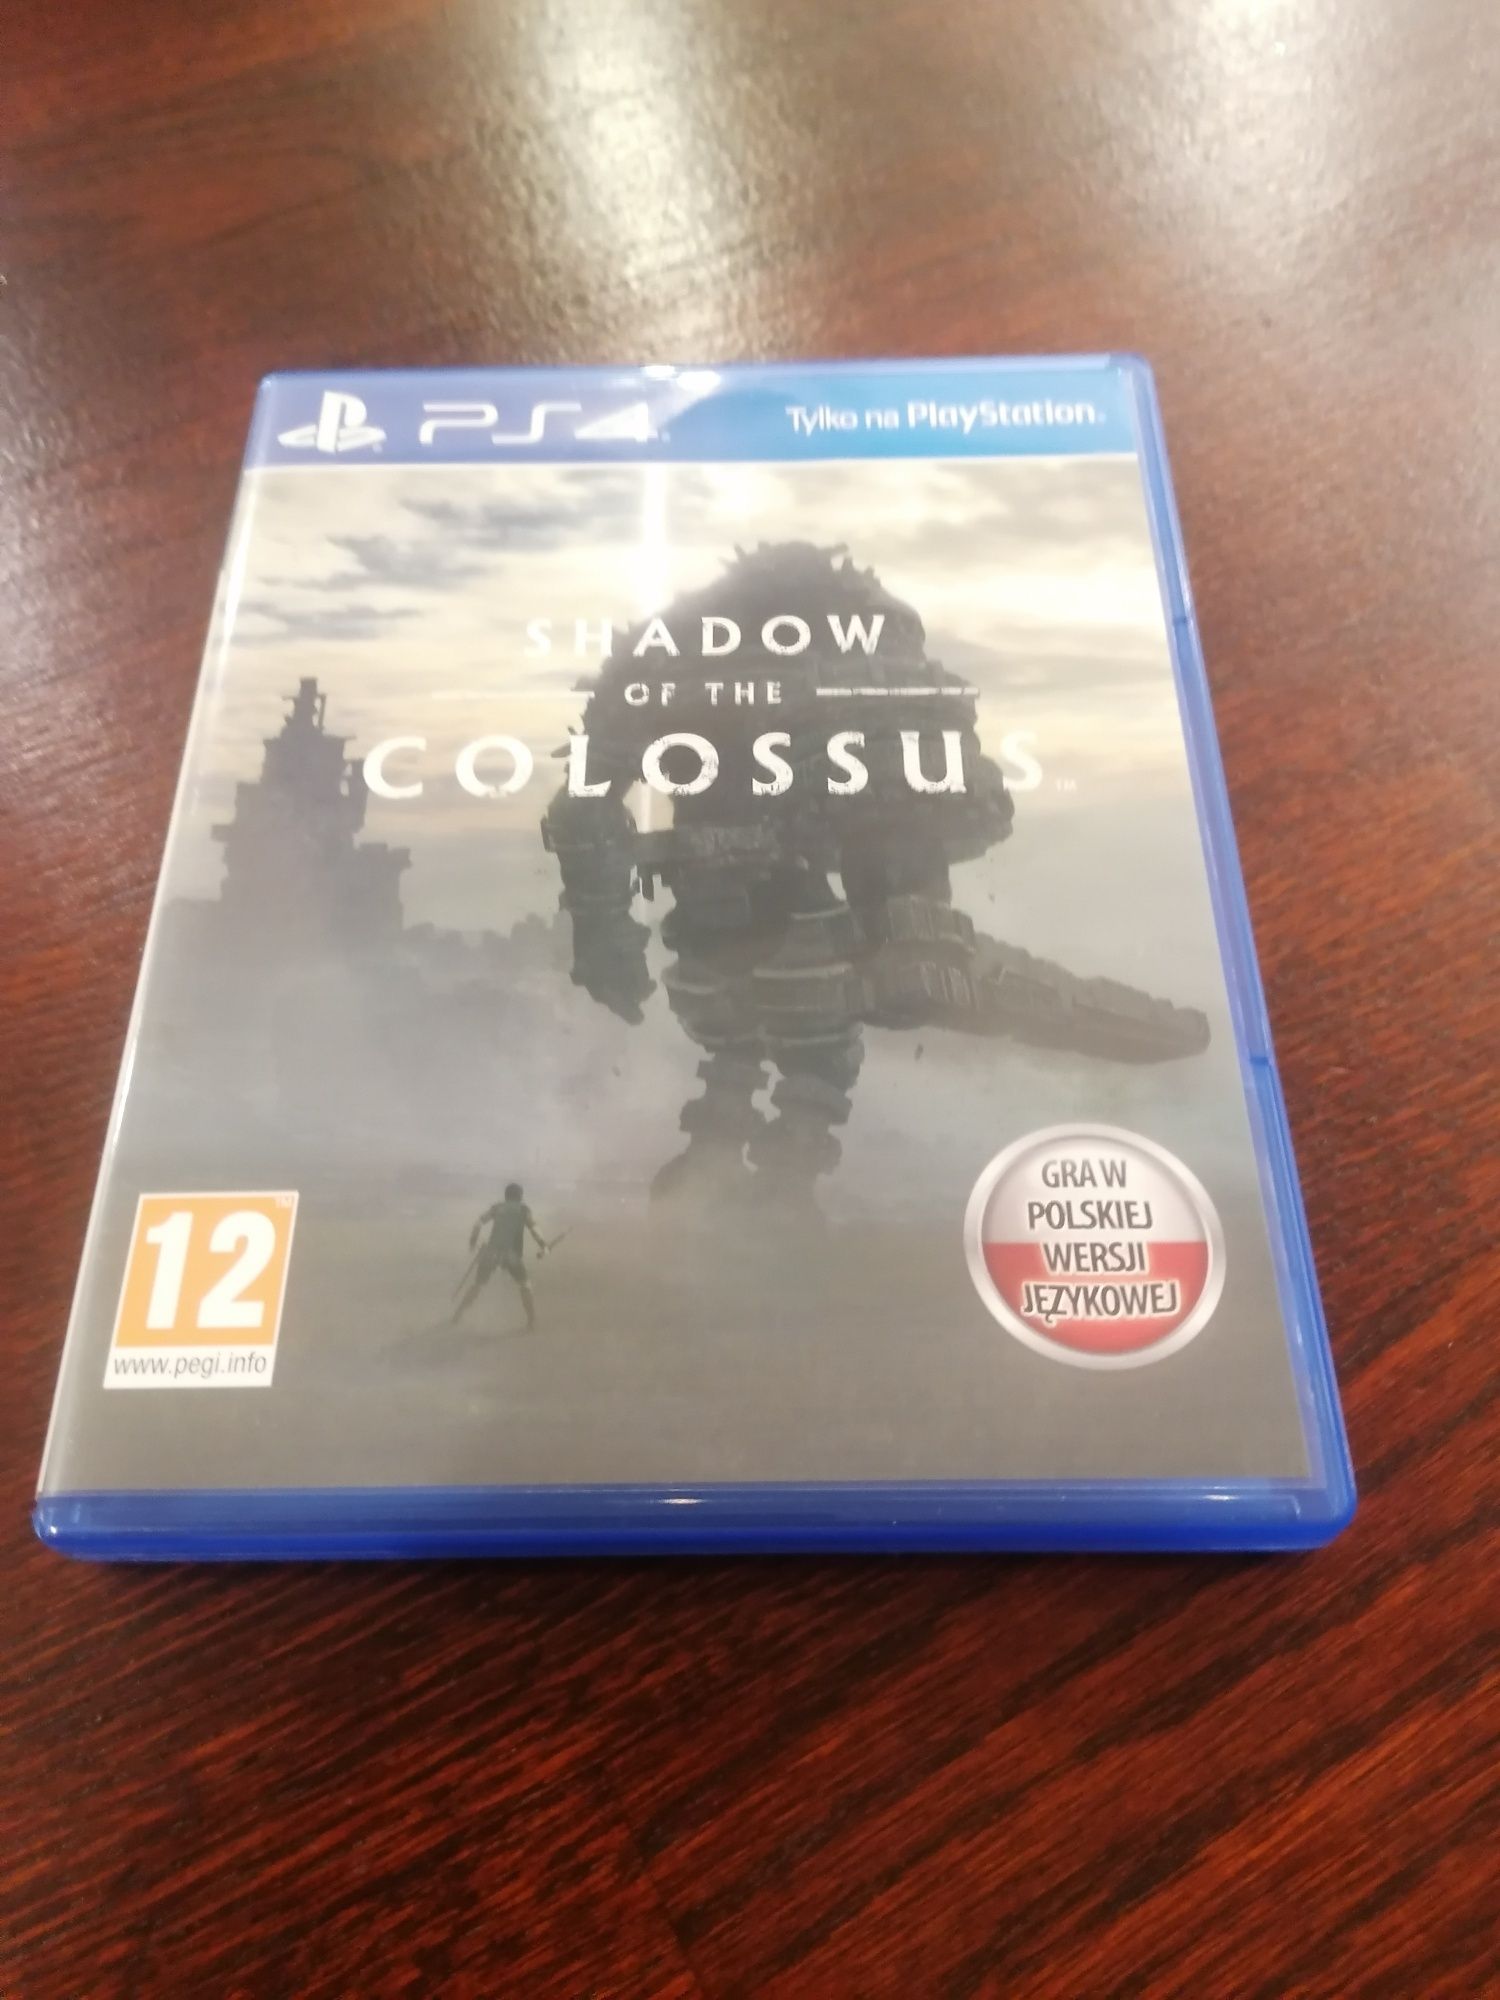 Gra ps4 Shadow of the colossus